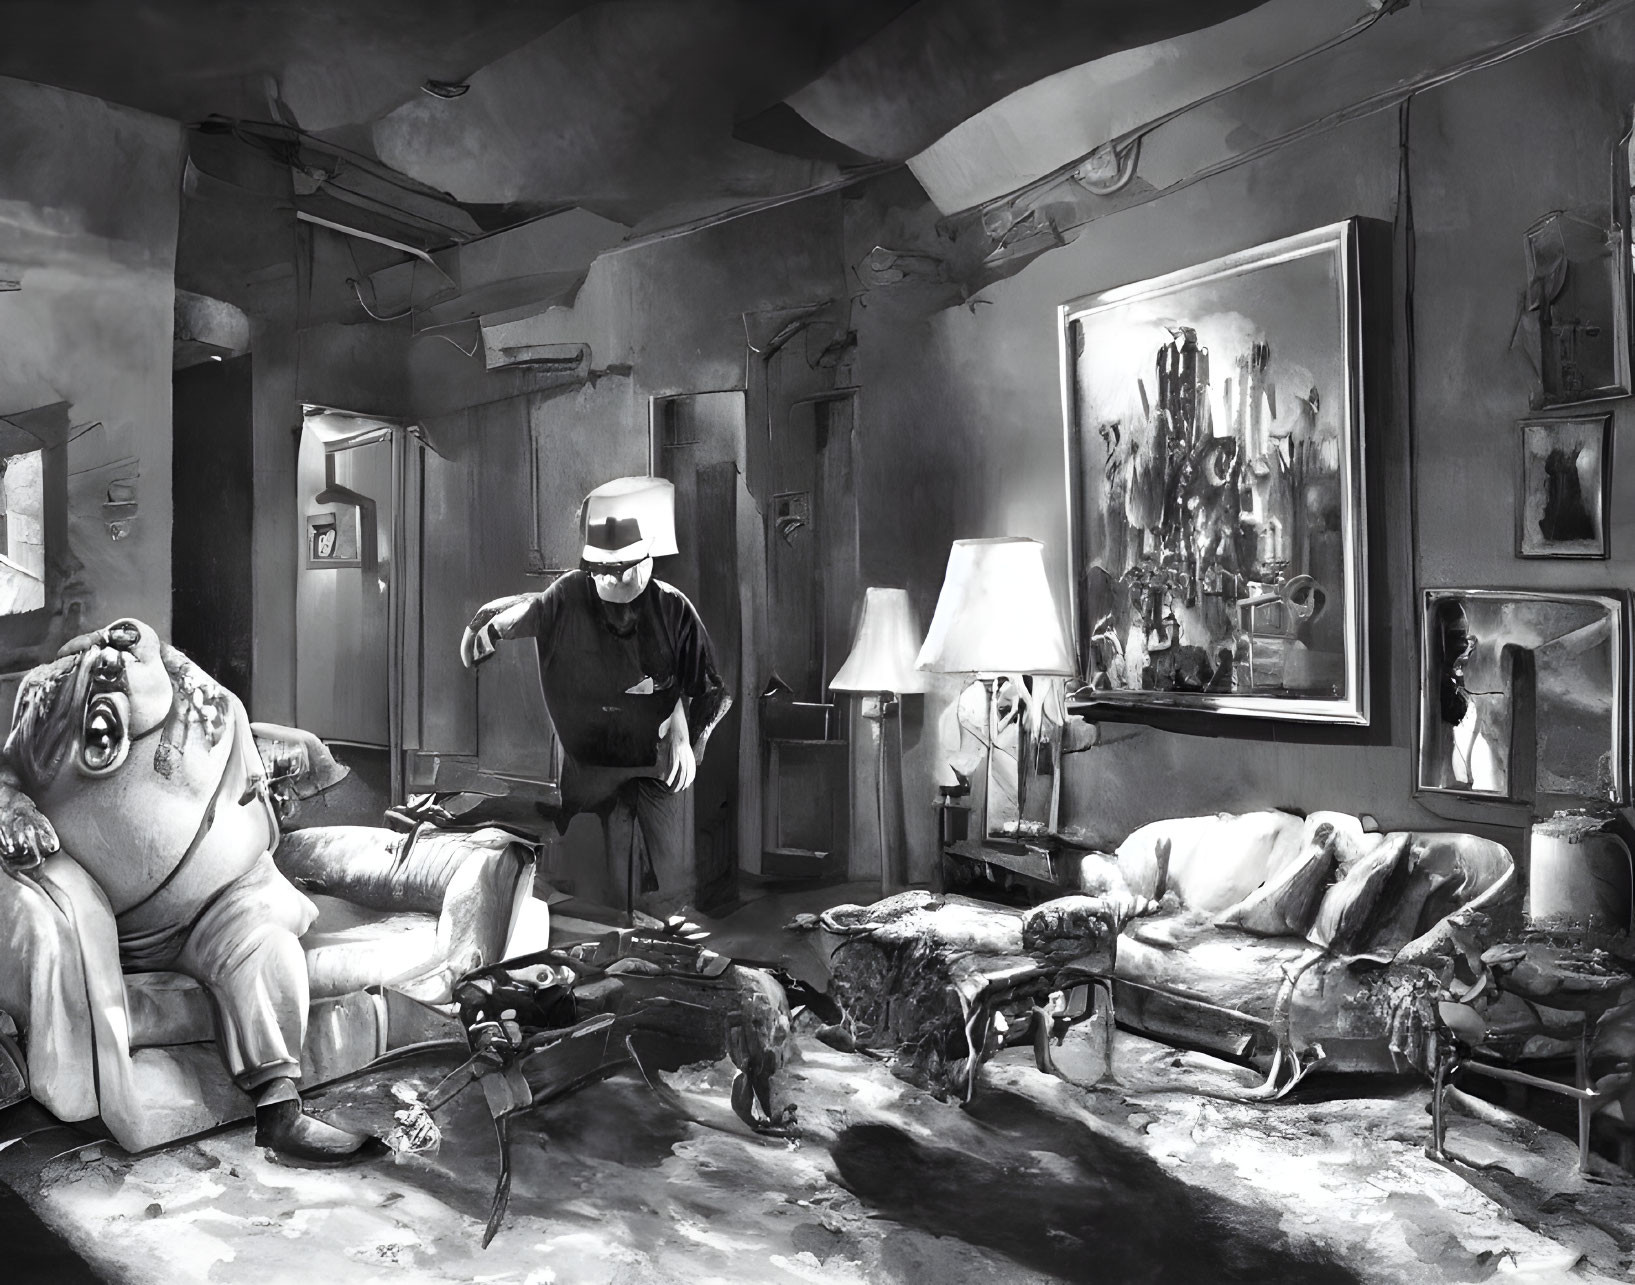 Monochrome illustration of disheveled room with man in hat gesturing to slumped figure